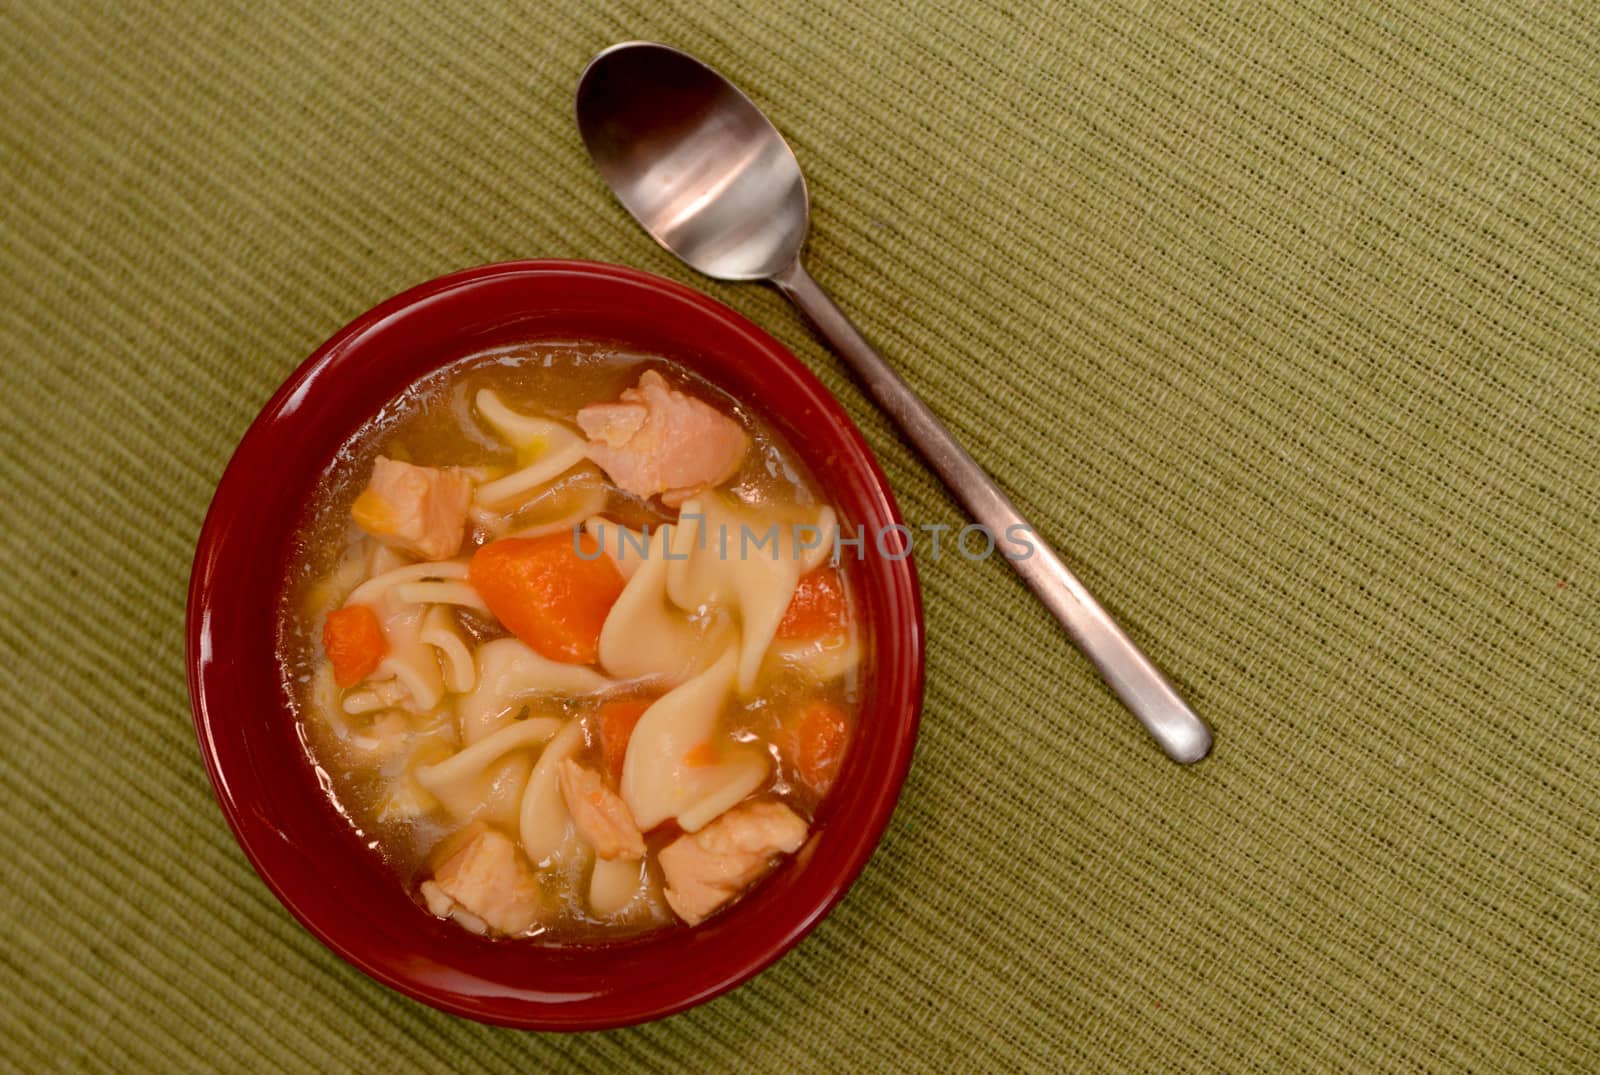 chicken noodle soup in red bowl with spoon